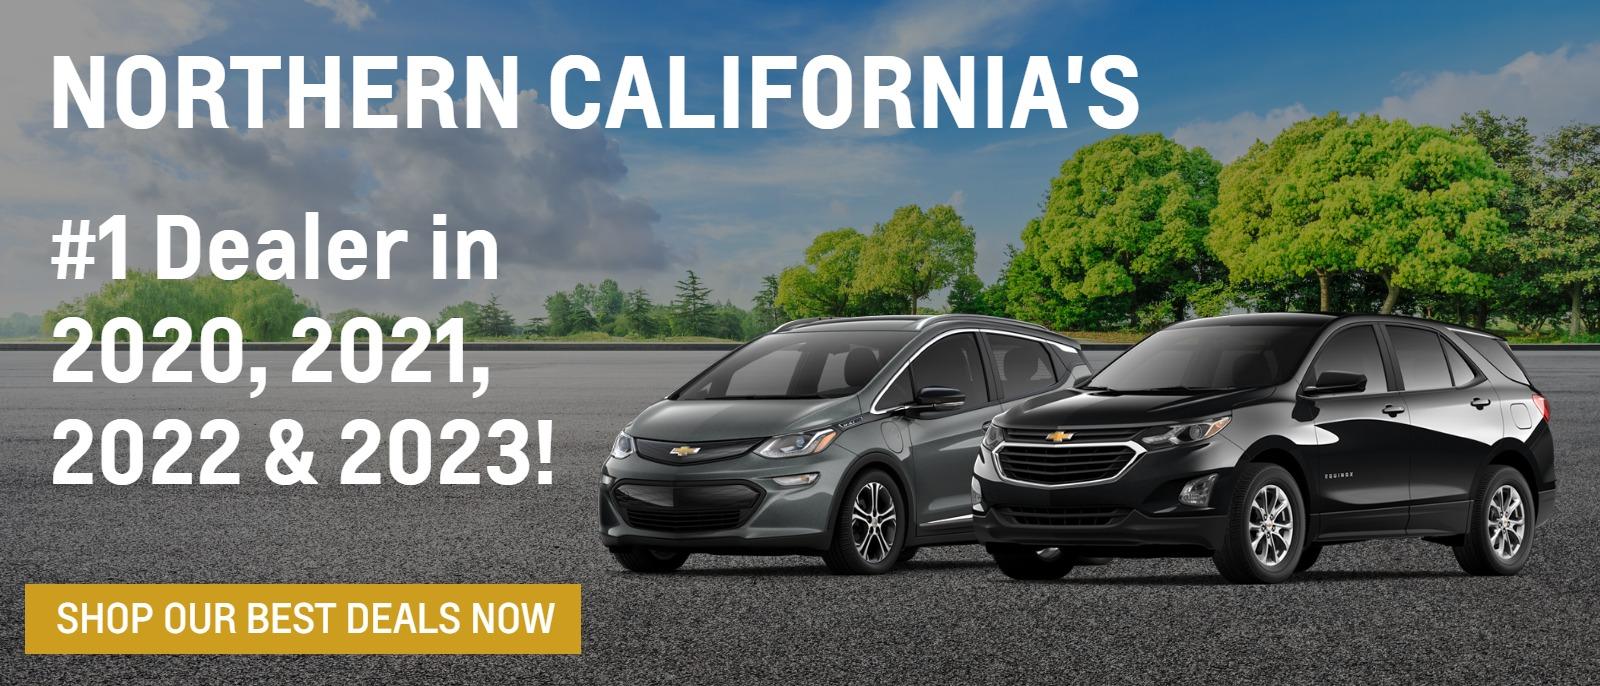 Northern Califonia's #1 Dealer in 2020 and 2021! Shop Our Best Deals Now!